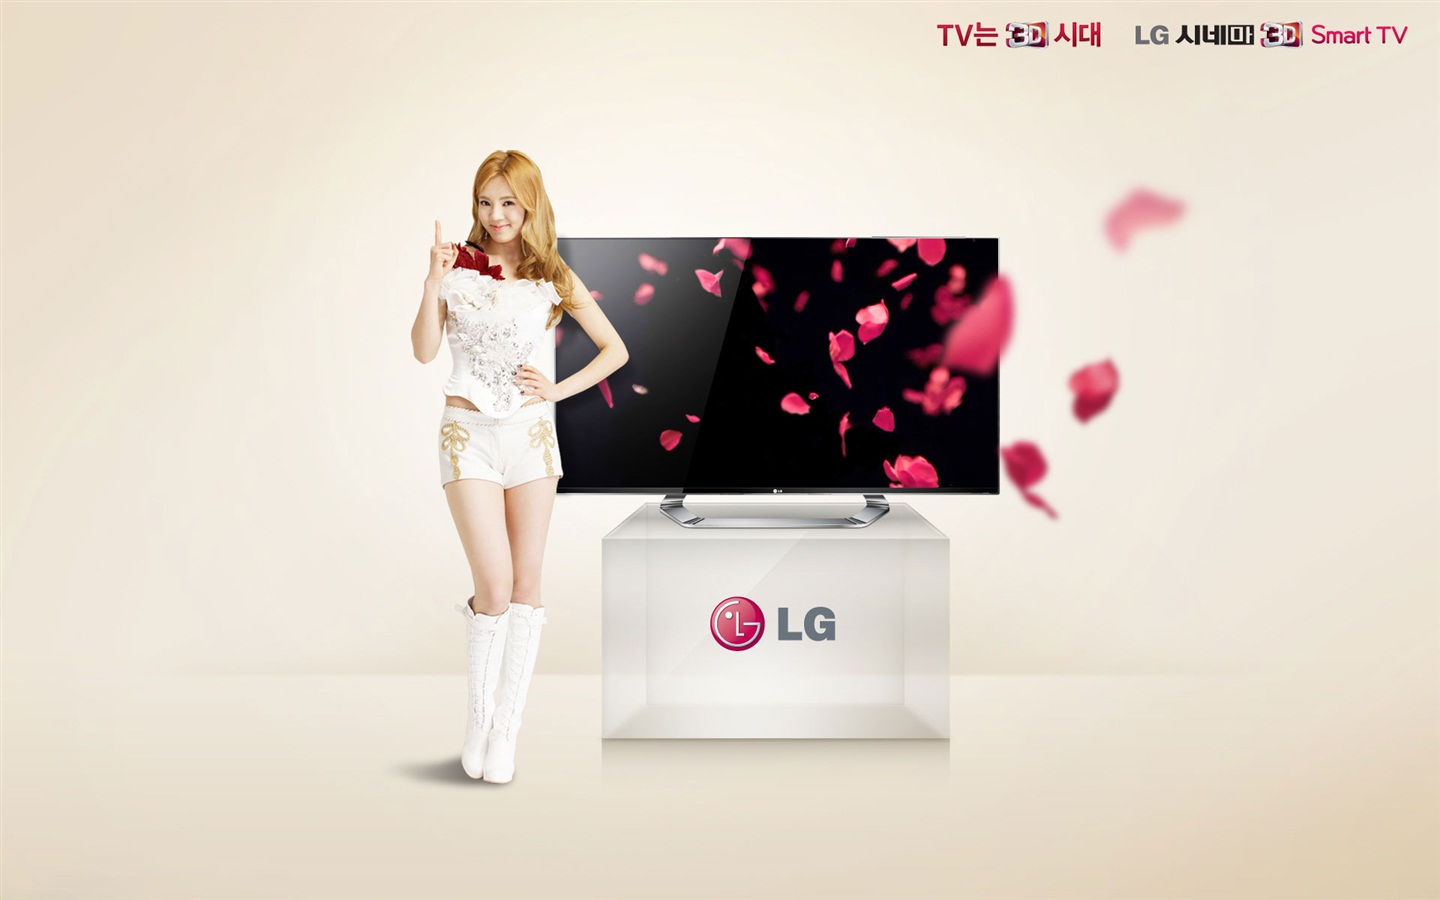 Girls Generation ACE and LG endorsements ads HD wallpapers #13 - 1440x900